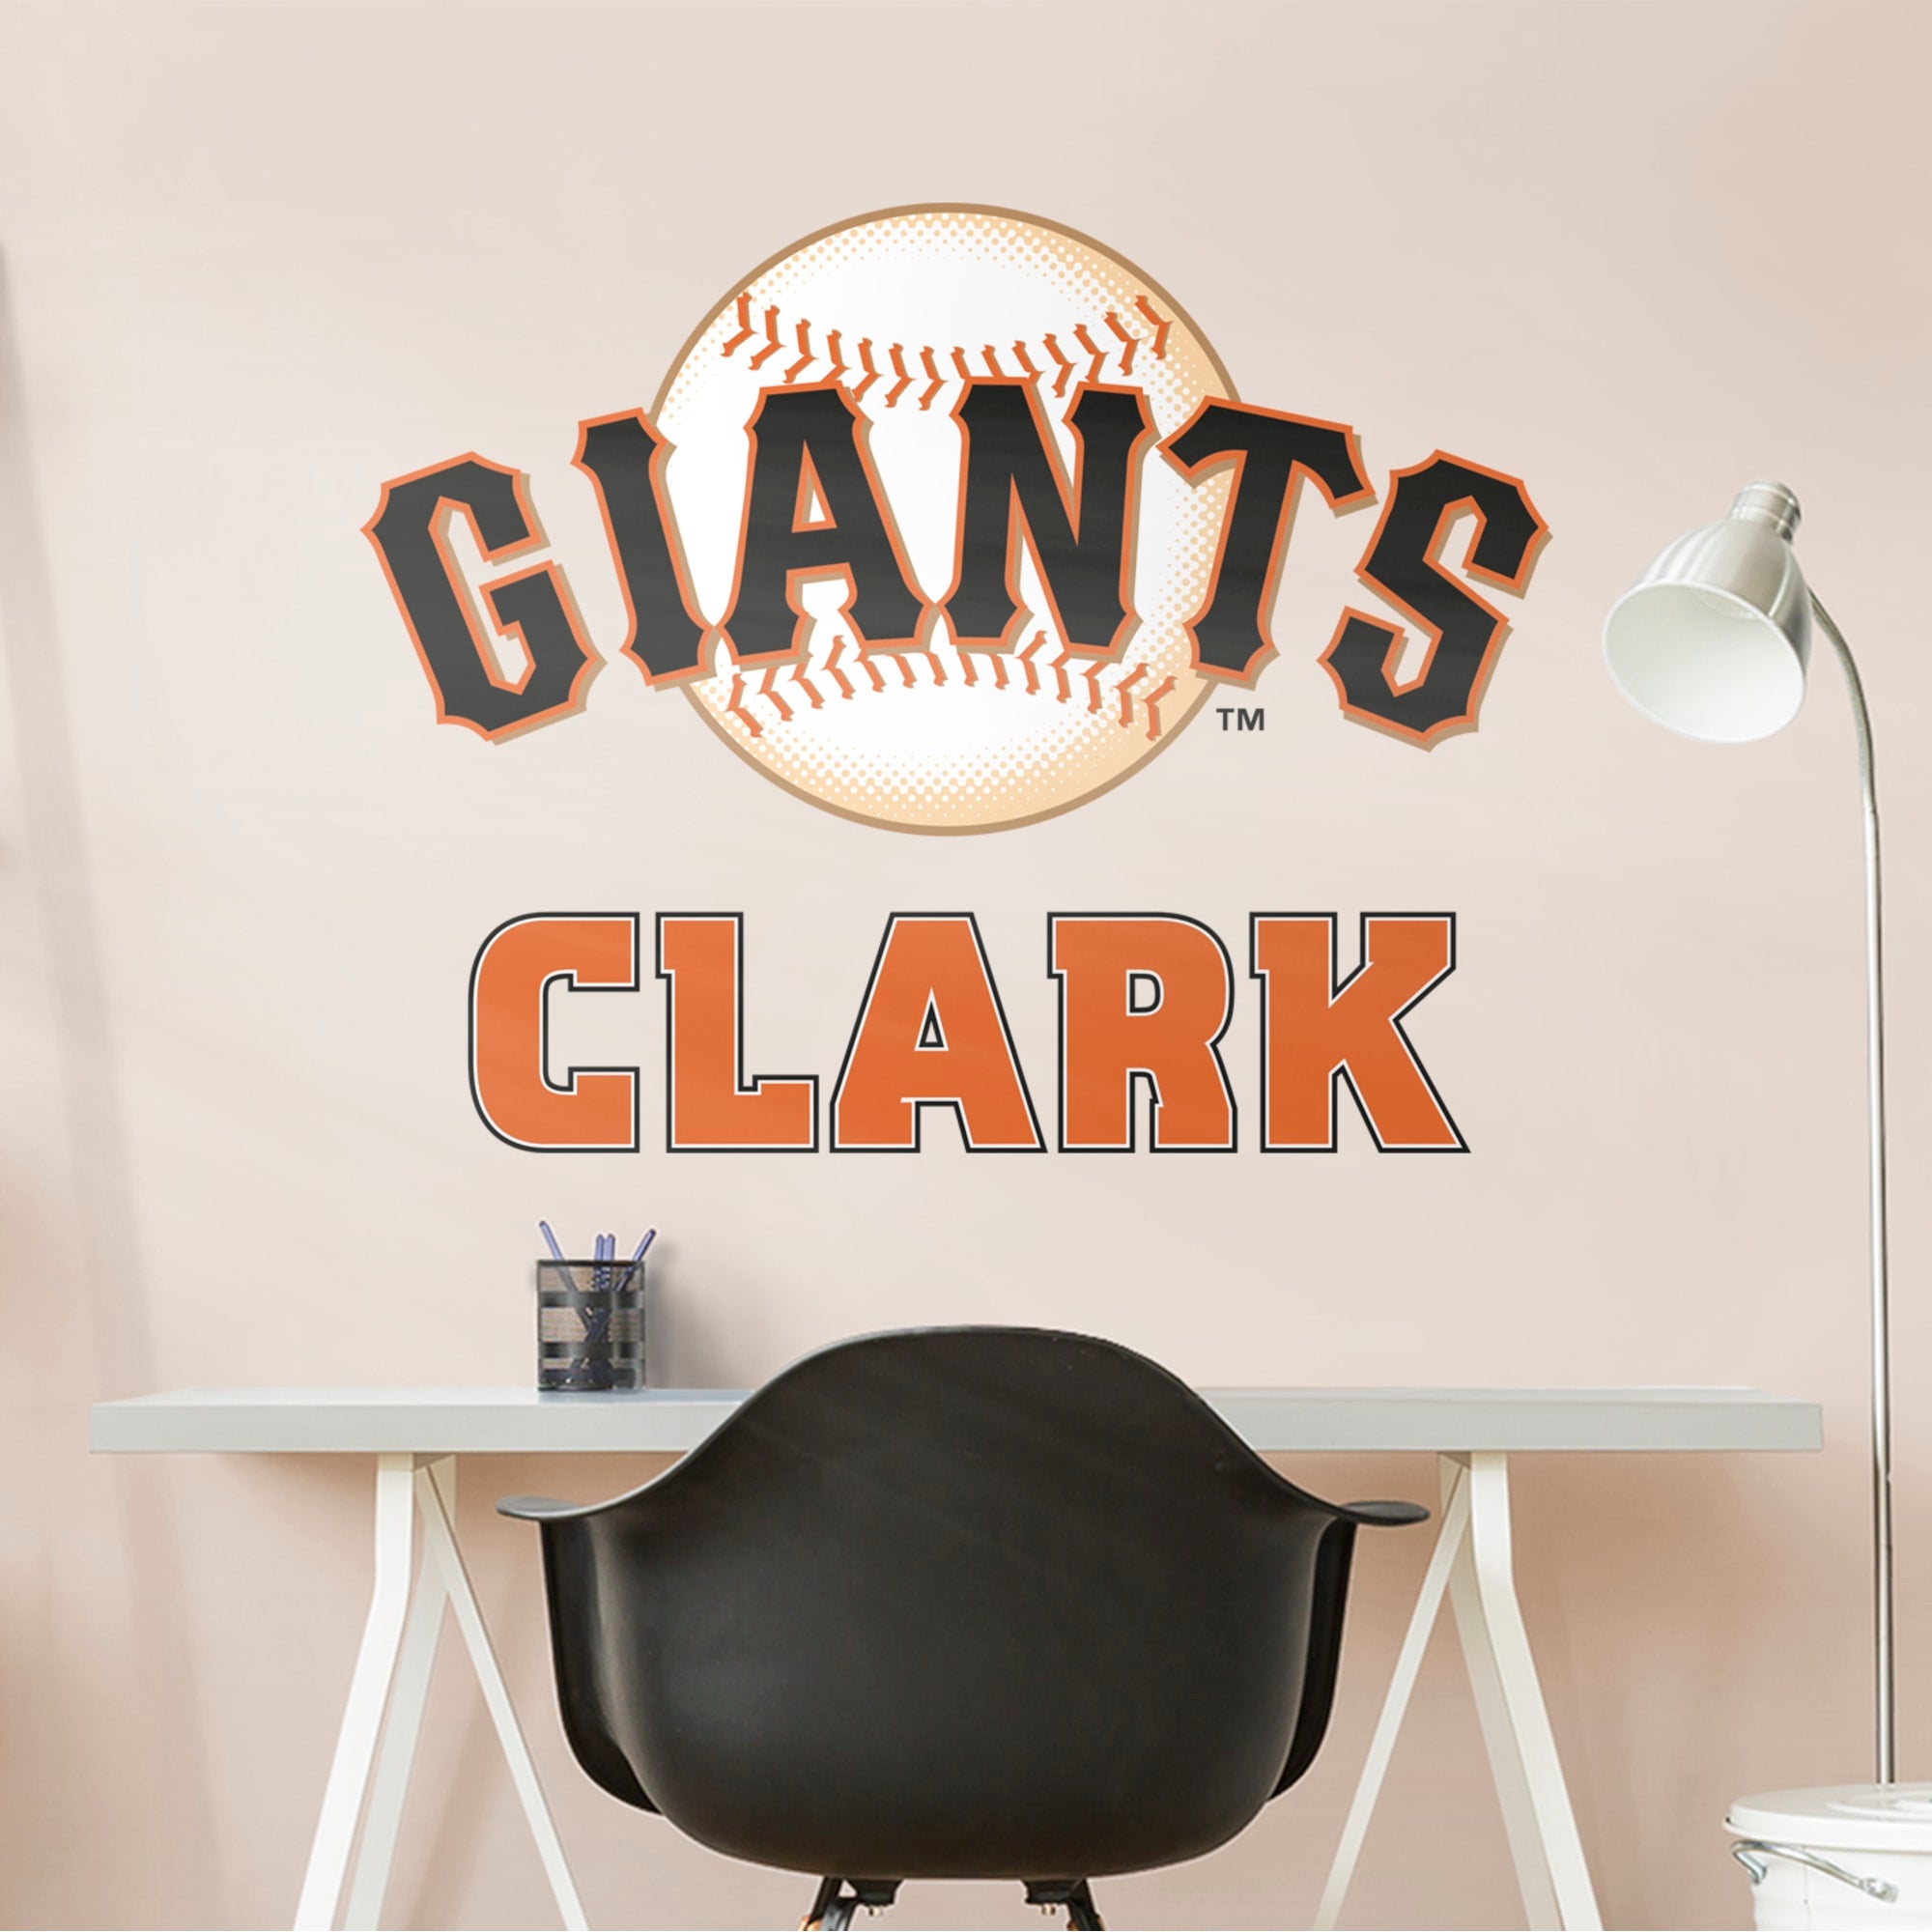 San Francisco Giants: Stacked Personalized Name - Officially Licensed MLB Transfer Decal in Orange (52"W x 39.5"H) by Fathead |